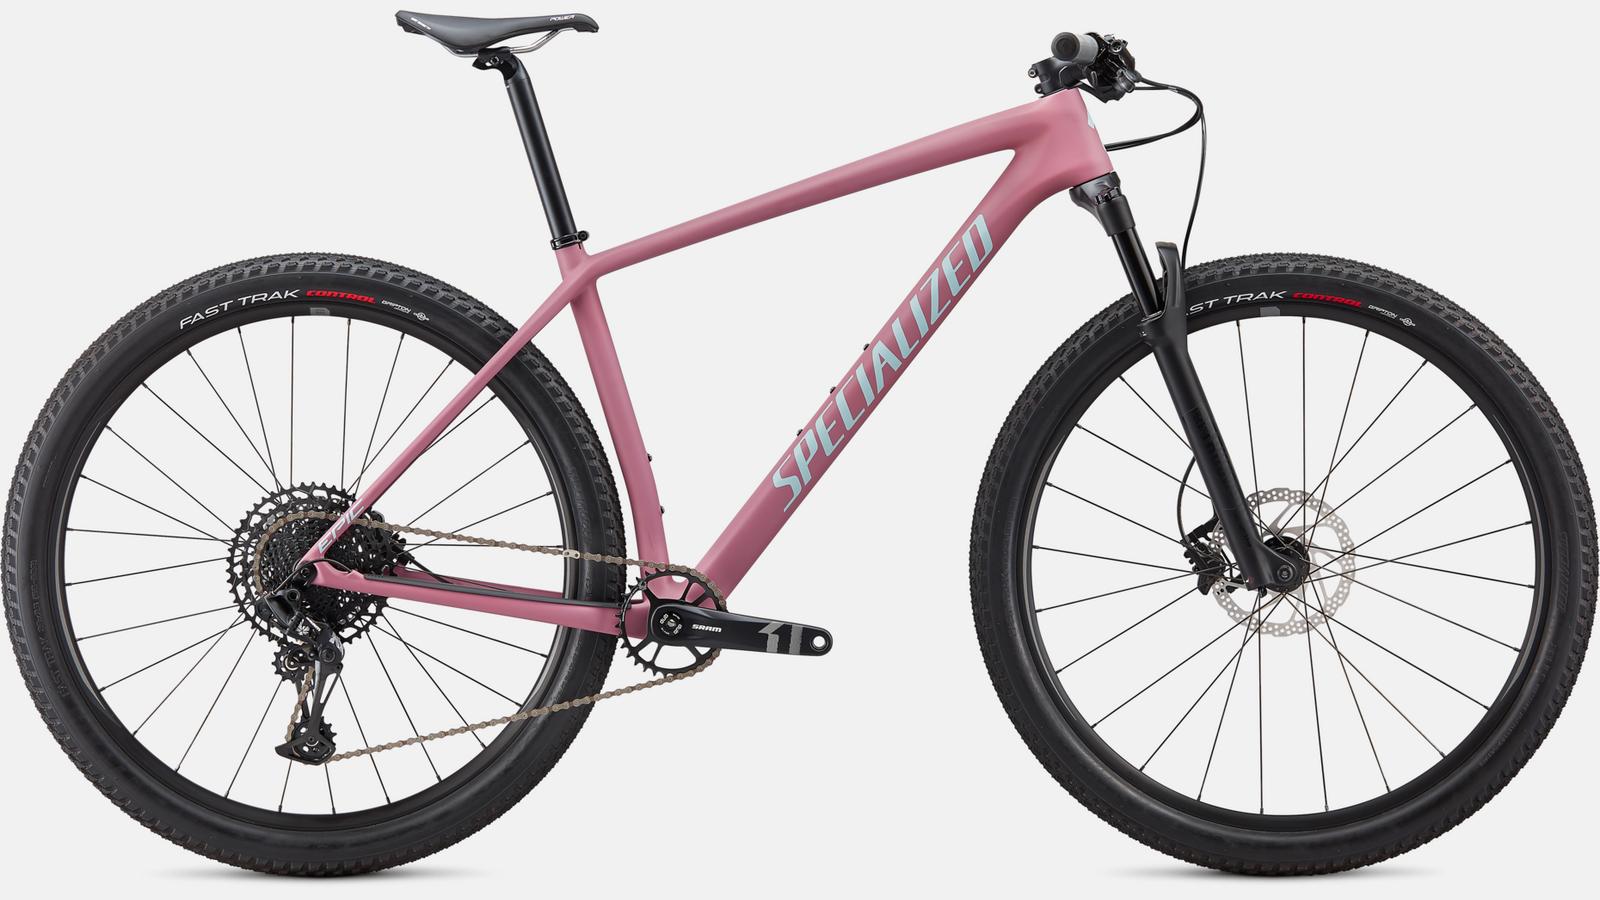 Paint for 2020 Specialized Epic Hardtail - Satin Dusty Lilac